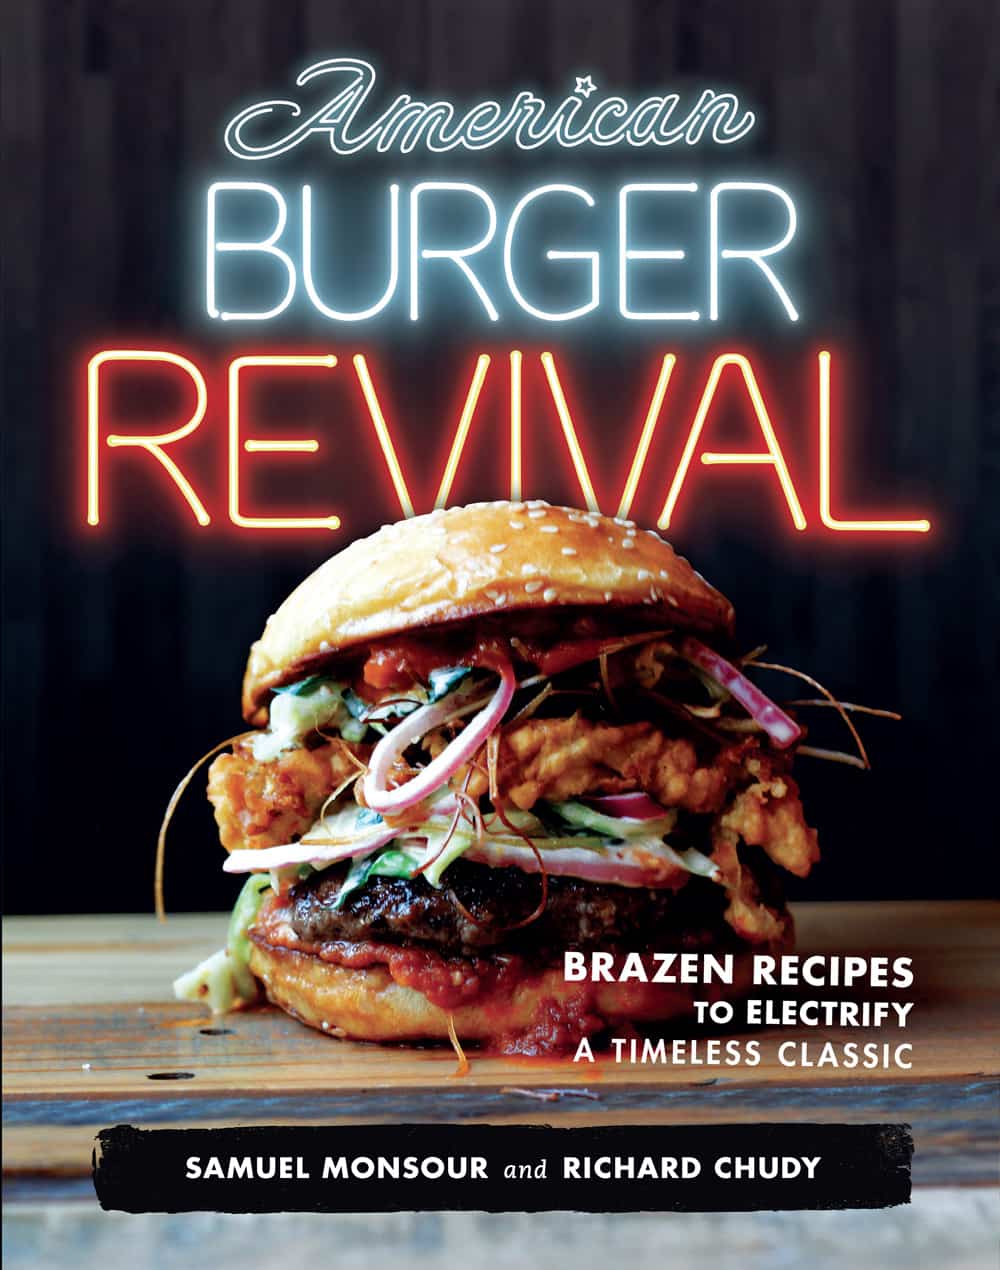 Cover of American Burger Revival by Richard Chudy and Samuel Monsour